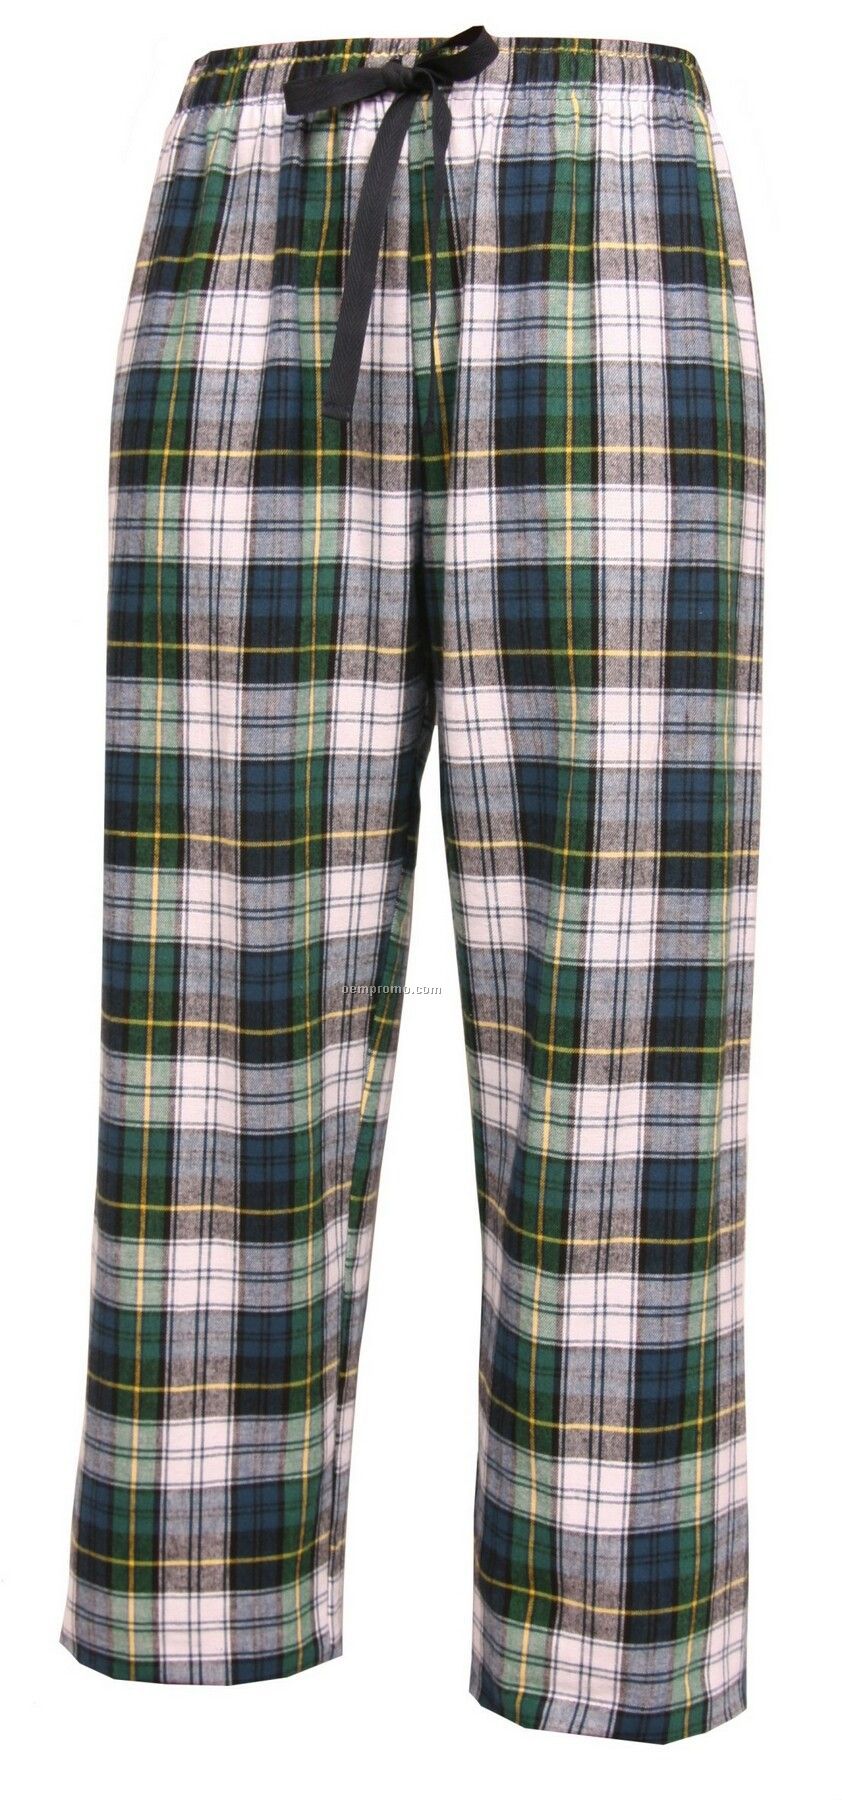 Adult Campbell Plaid Fashion Flannel Pant With Tie Cord